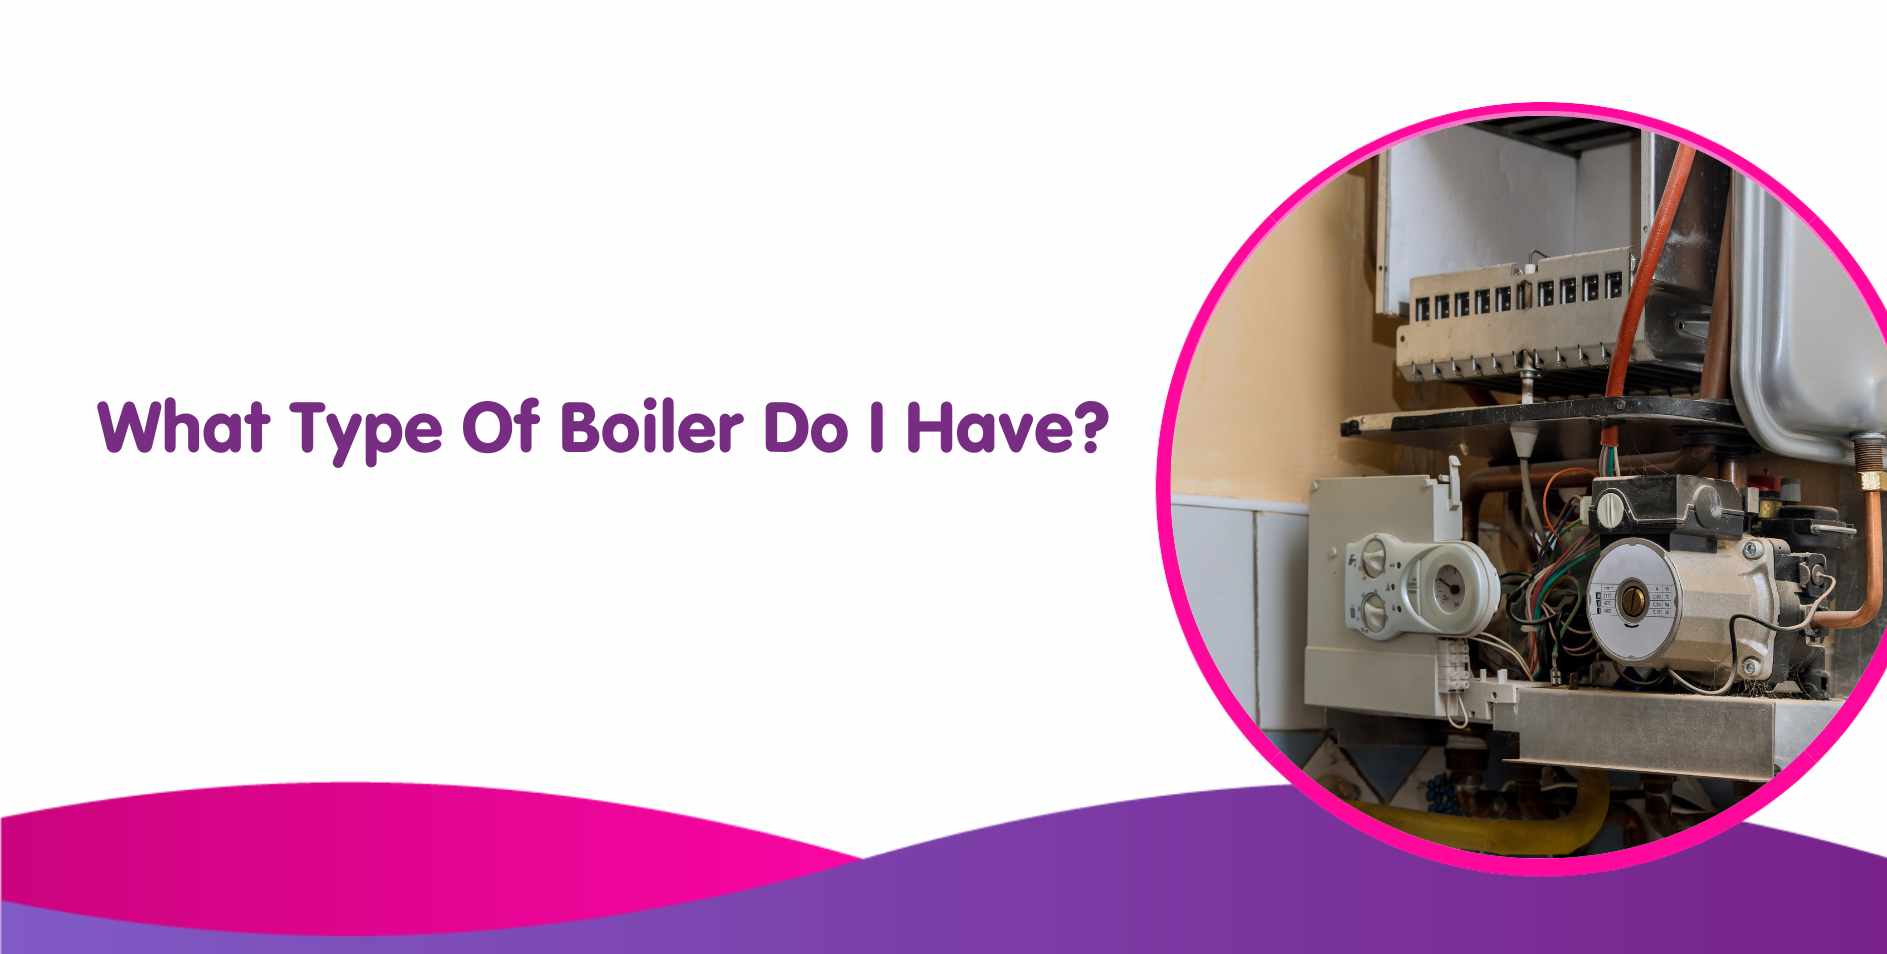 What Type of Boiler Do I Have For My Central Heating System?